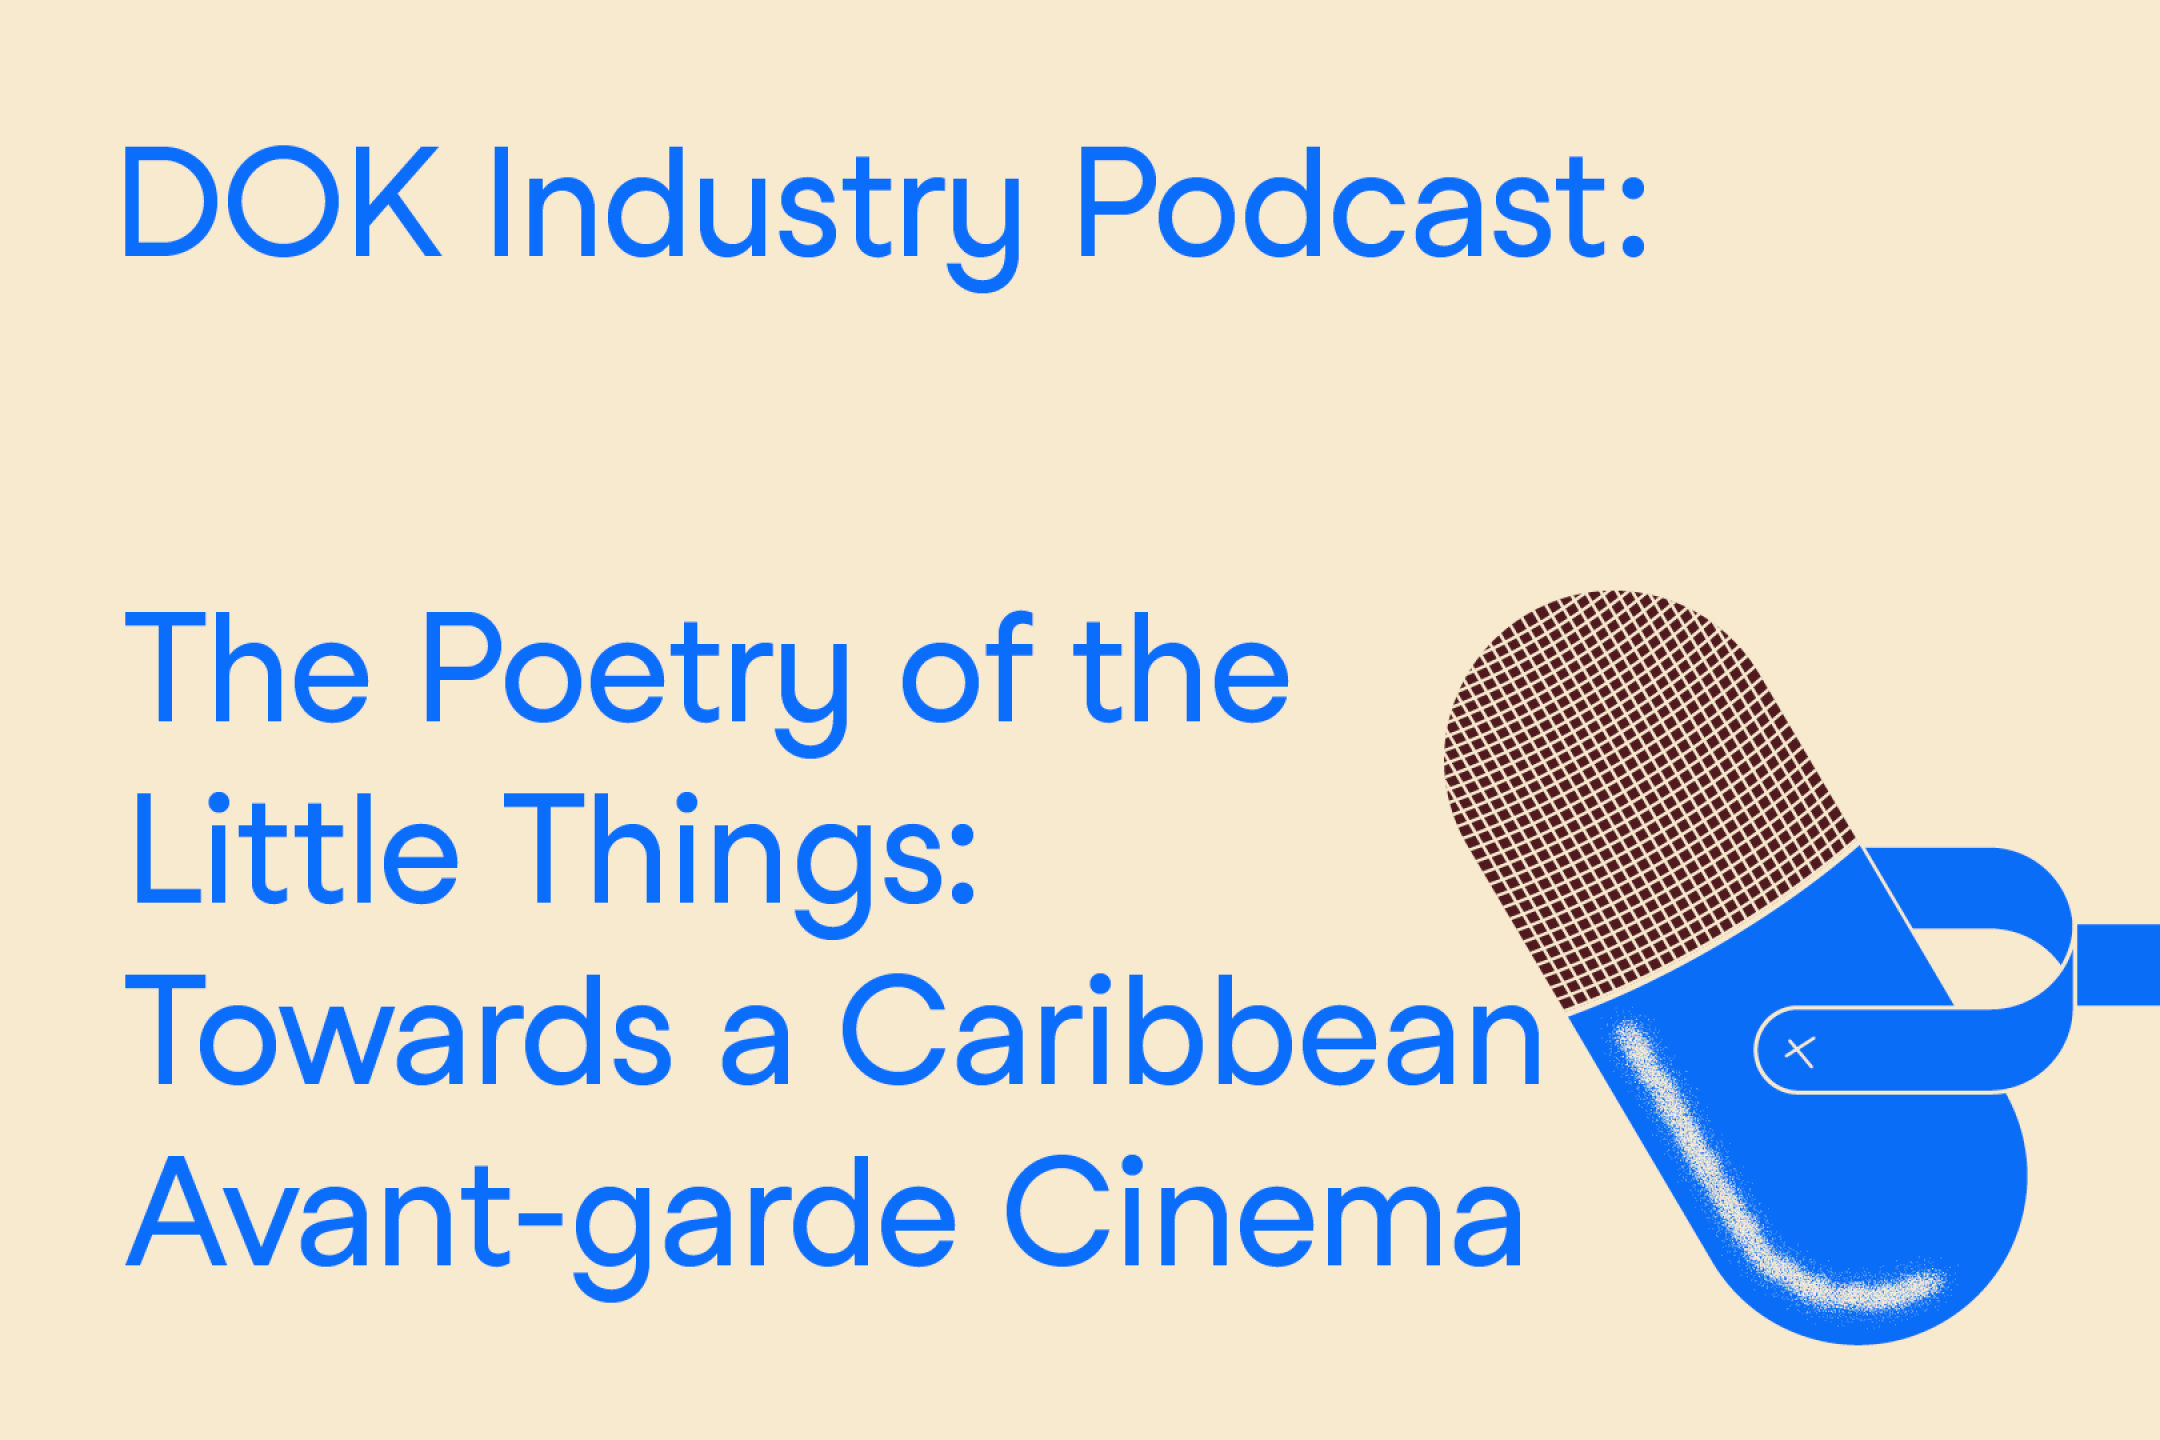 A text graphic with blue letters on a yellow background. At the right the illustration of a microphone. At the left the text: “Dok Industry Podcast: The Poetry of the Little Things: Towards a Caribbean Avant-Garde Cinema”